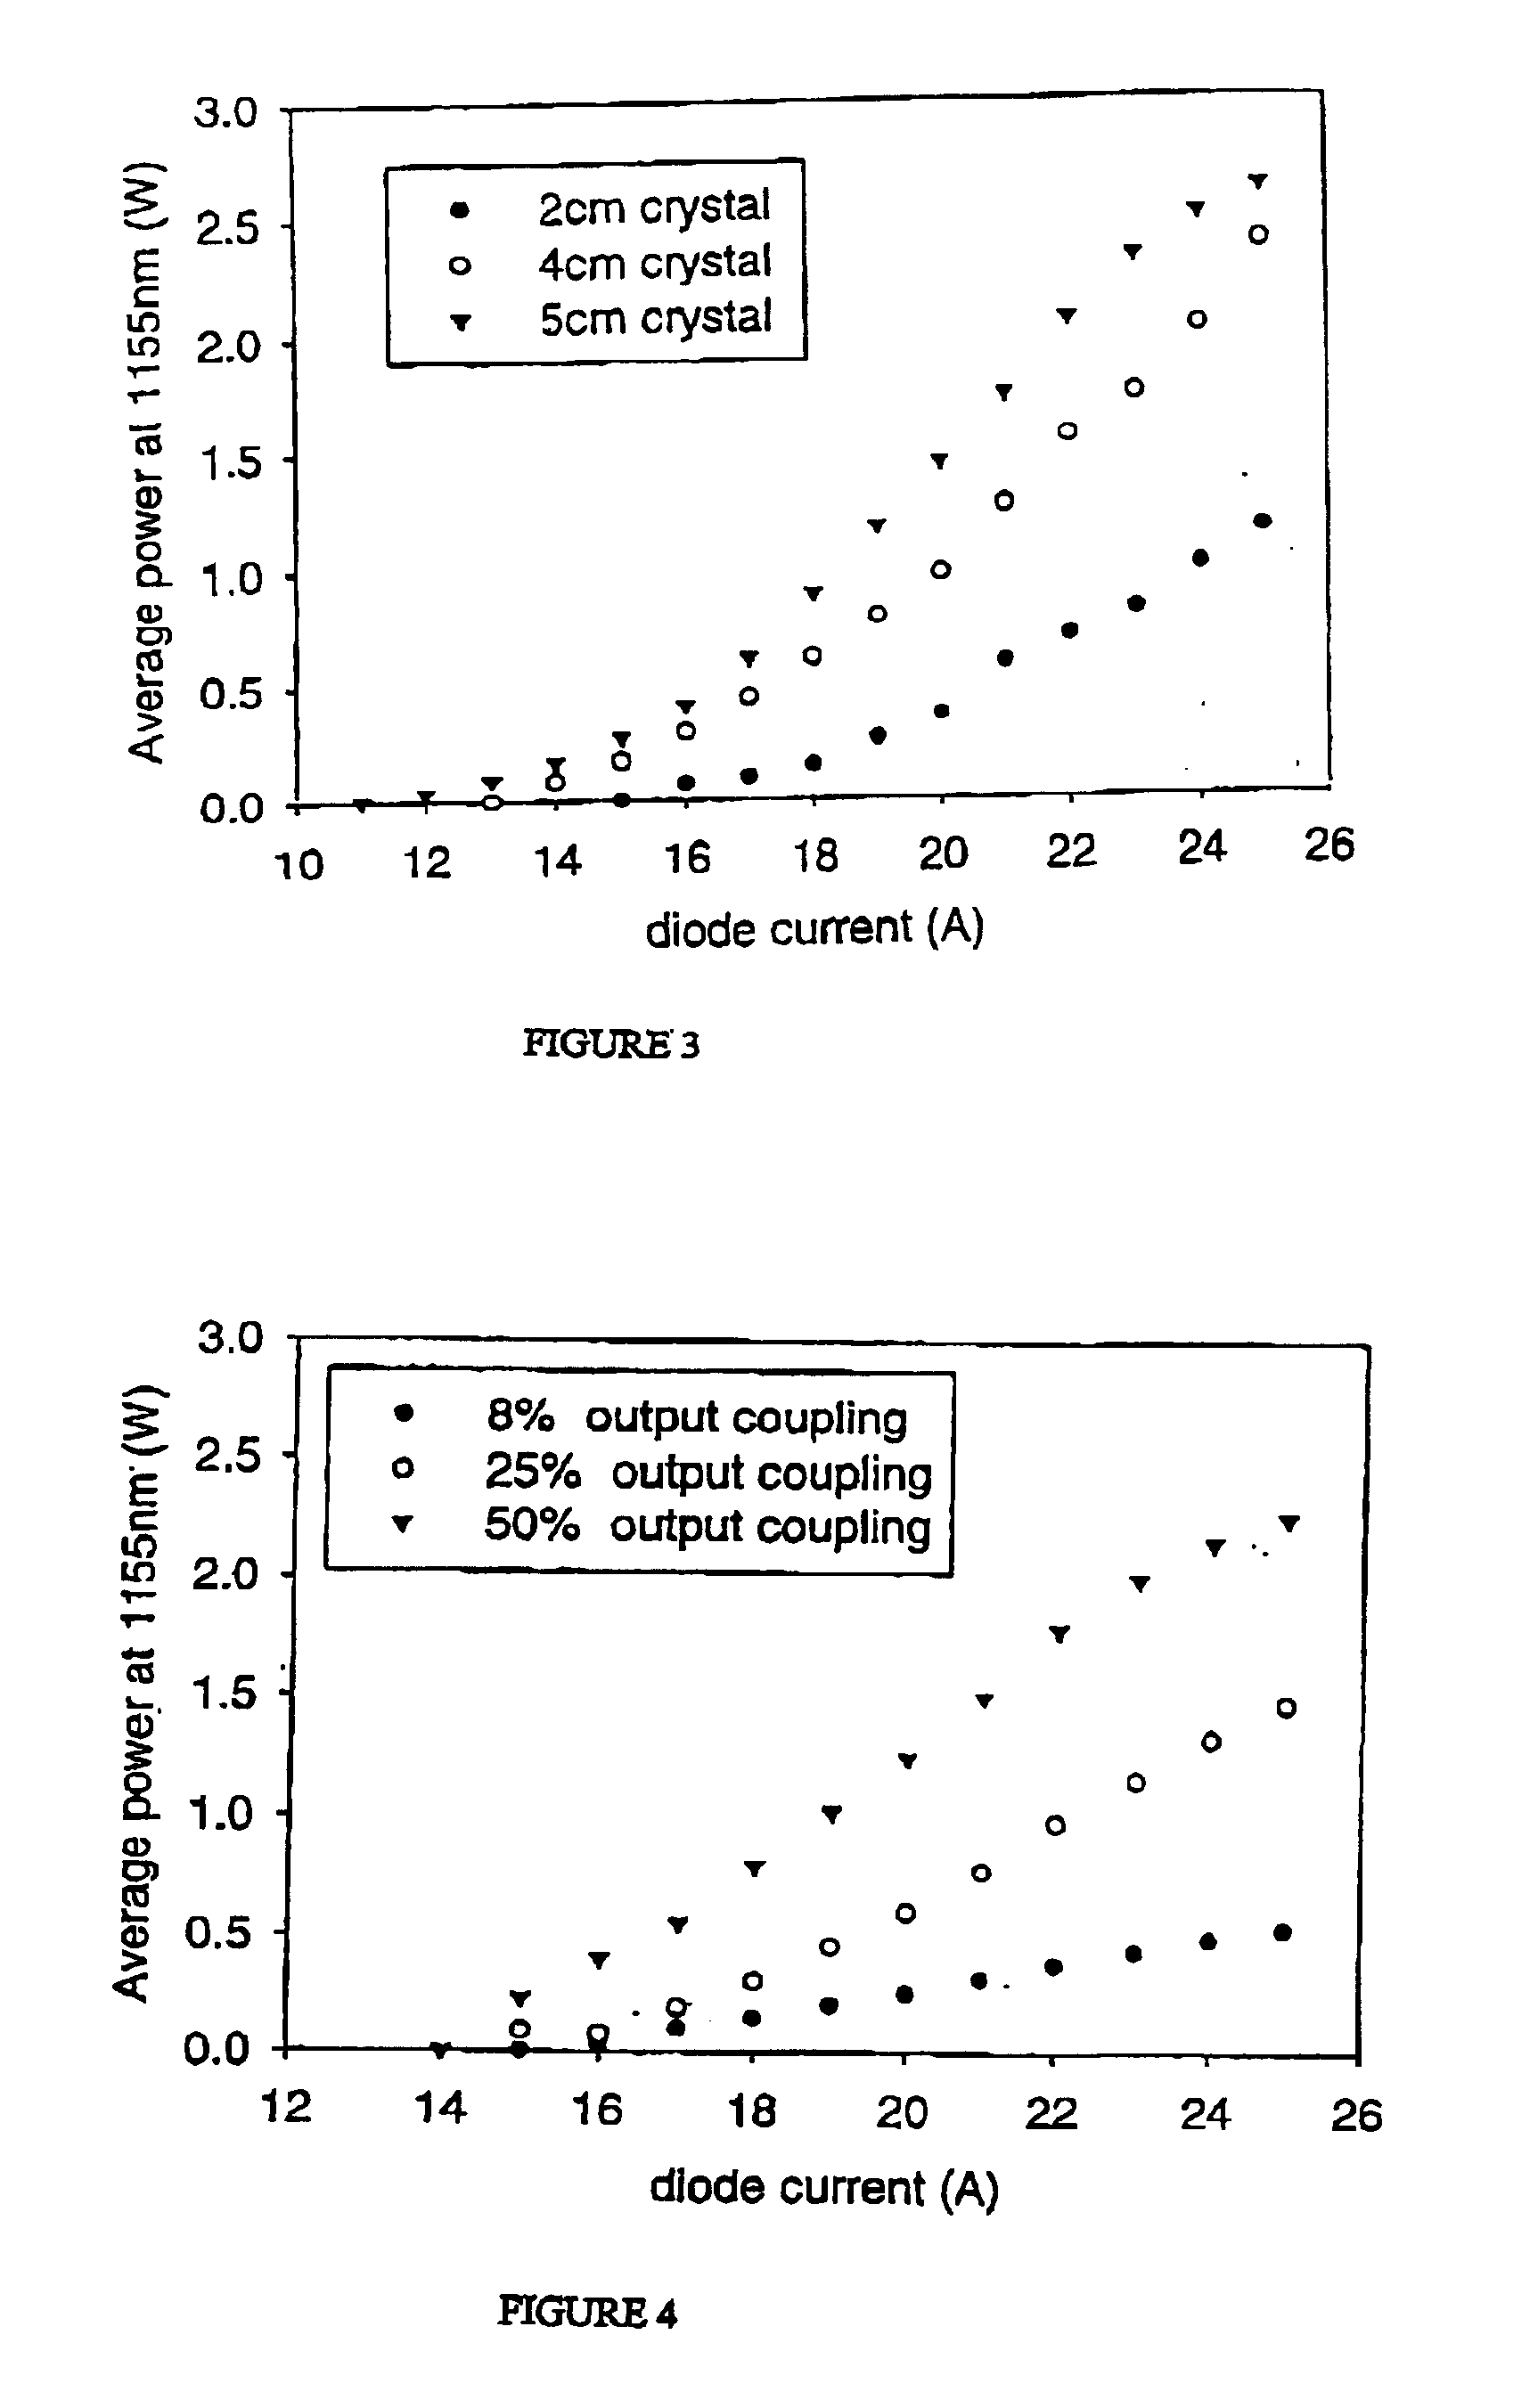 Stable solid state raman laser and a method of operating same